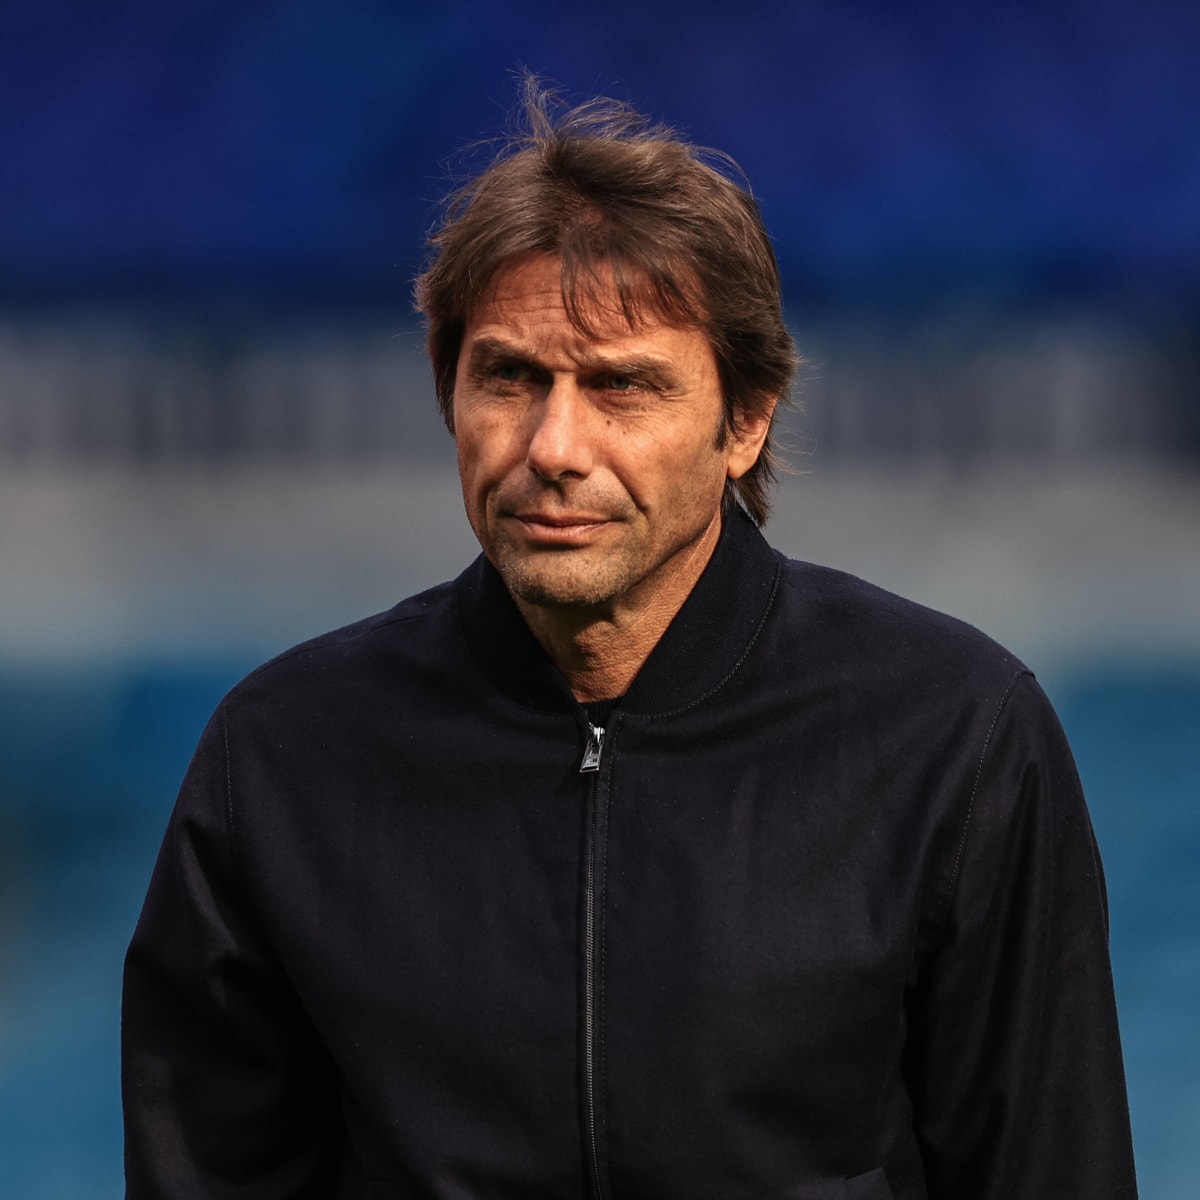 Antonio Conte addresses Chelsea fans as he gives his take on Roman Abramovich era - Sports Illustrated Chelsea FC News, Analysis and More